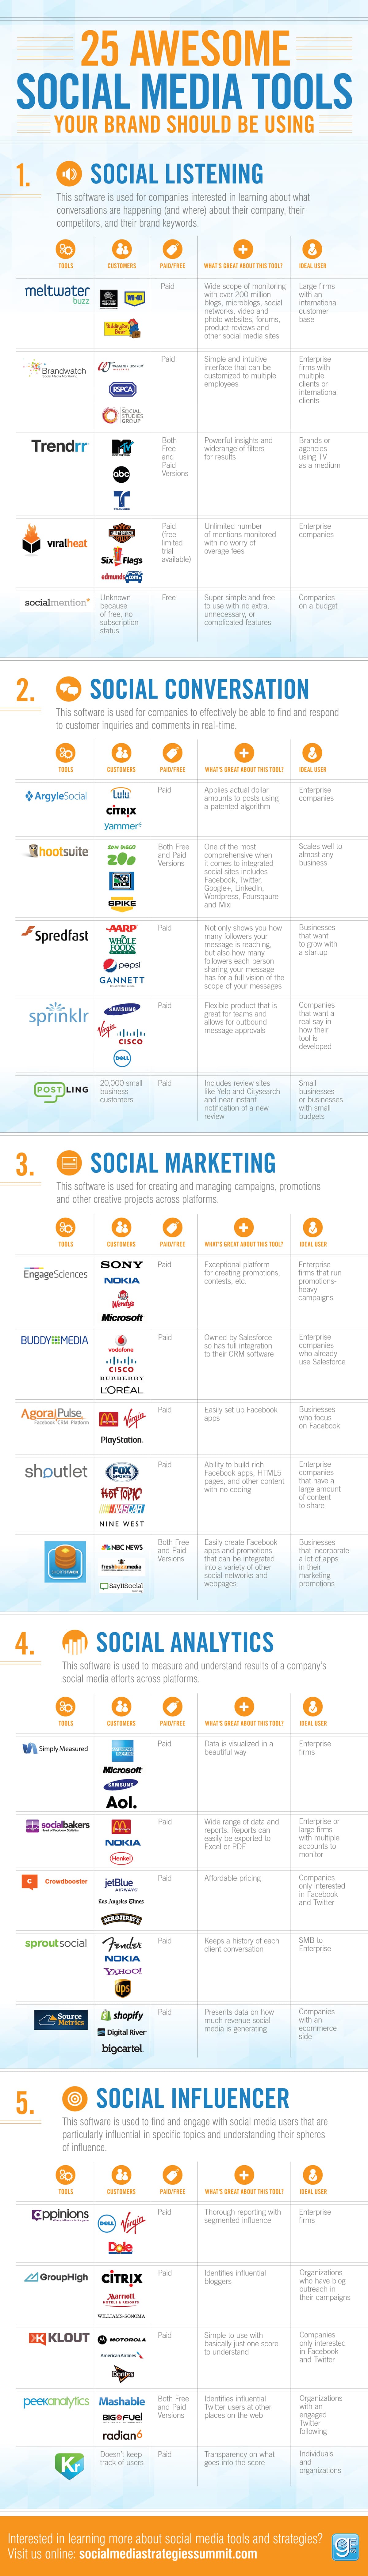 25 Social Media Tools Your Brand Should Be Using [Infographic]